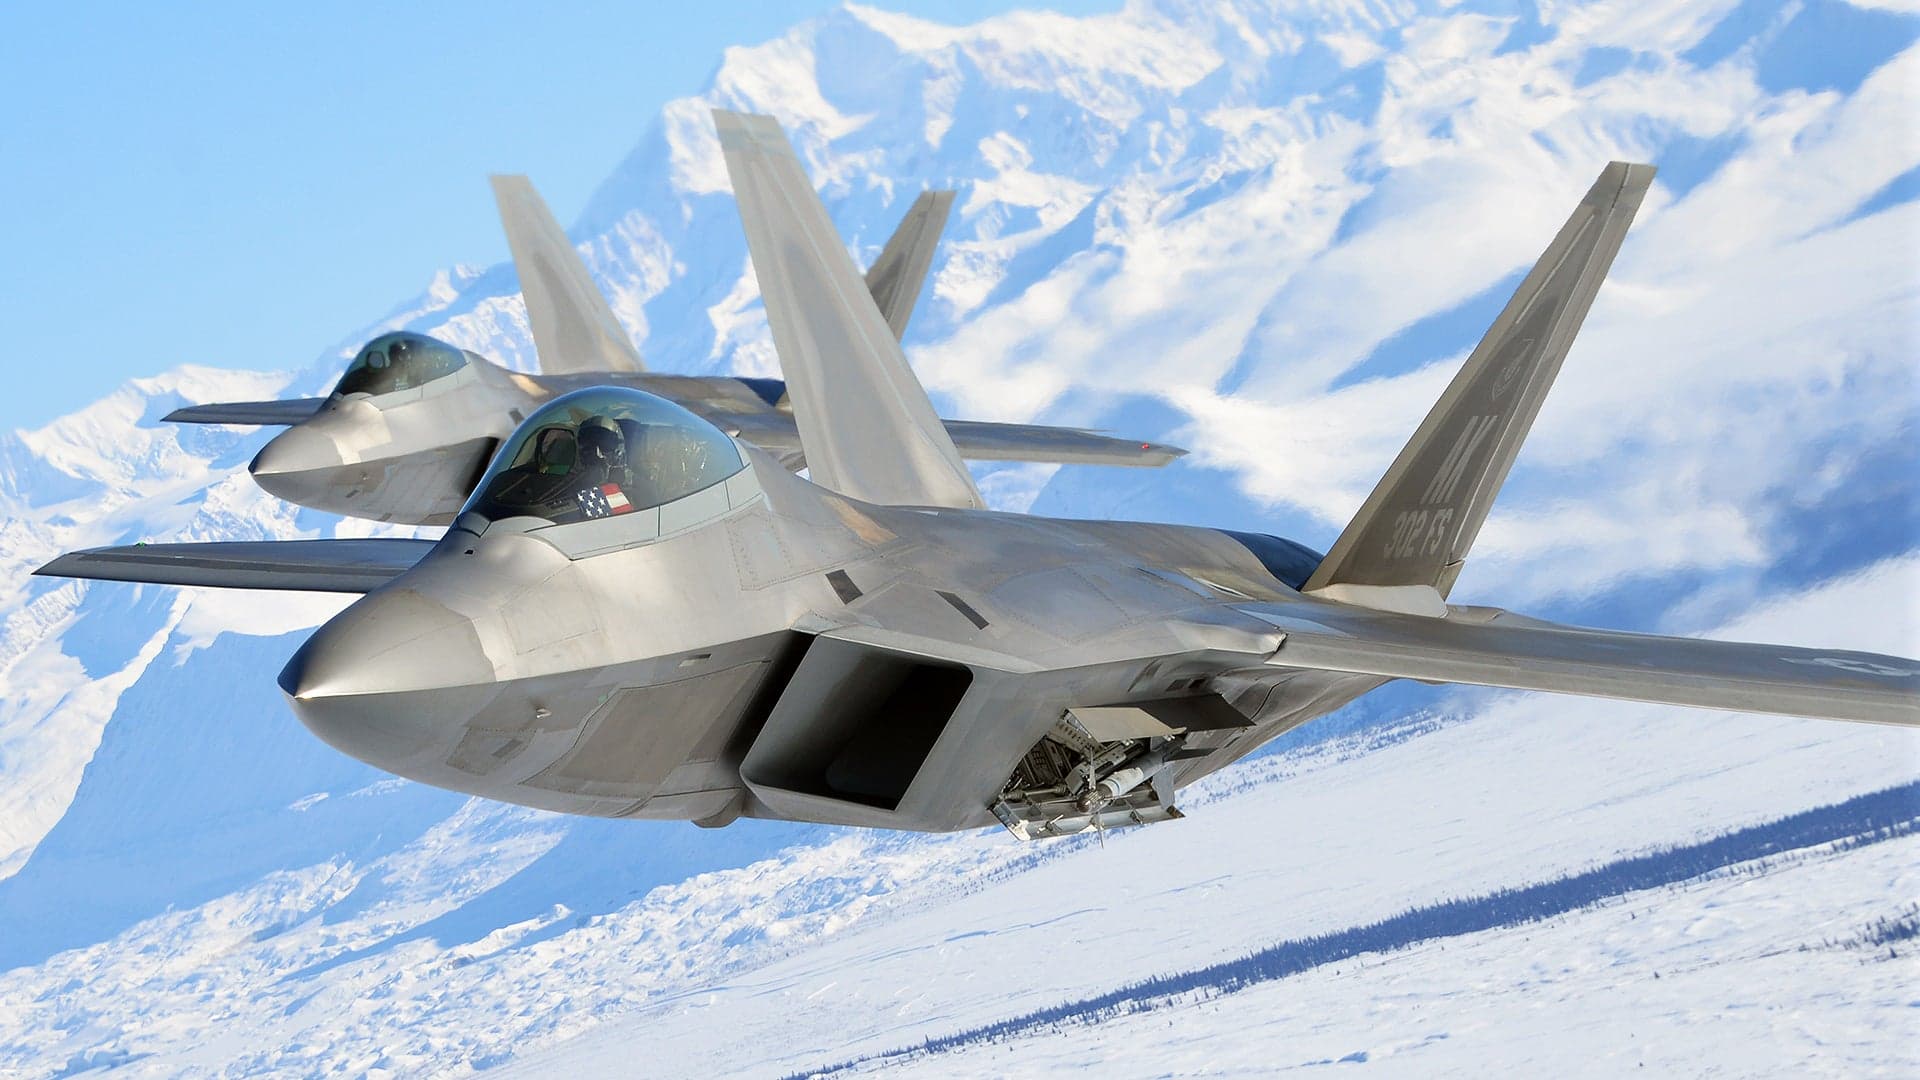 Watchdog Says USAF Is Wasting F-22s On Patrols And Deployments, Should Consolidate Force